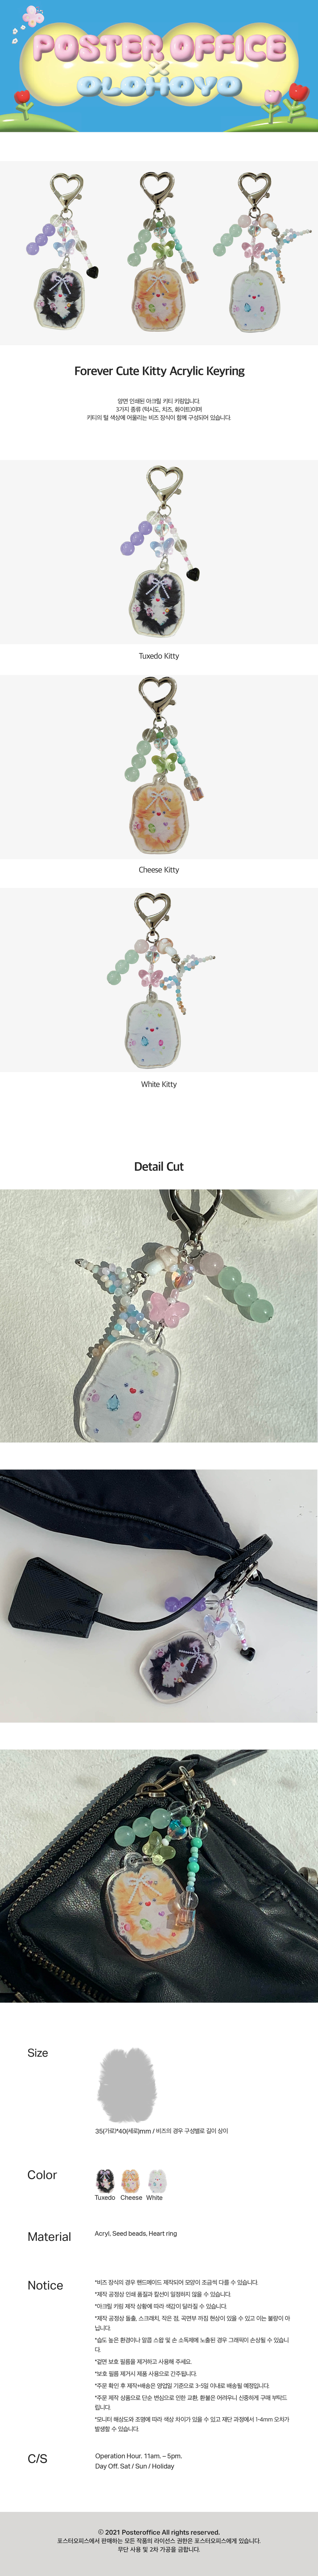 Forever Cute Kitty Acrylic Keyring - 3 type